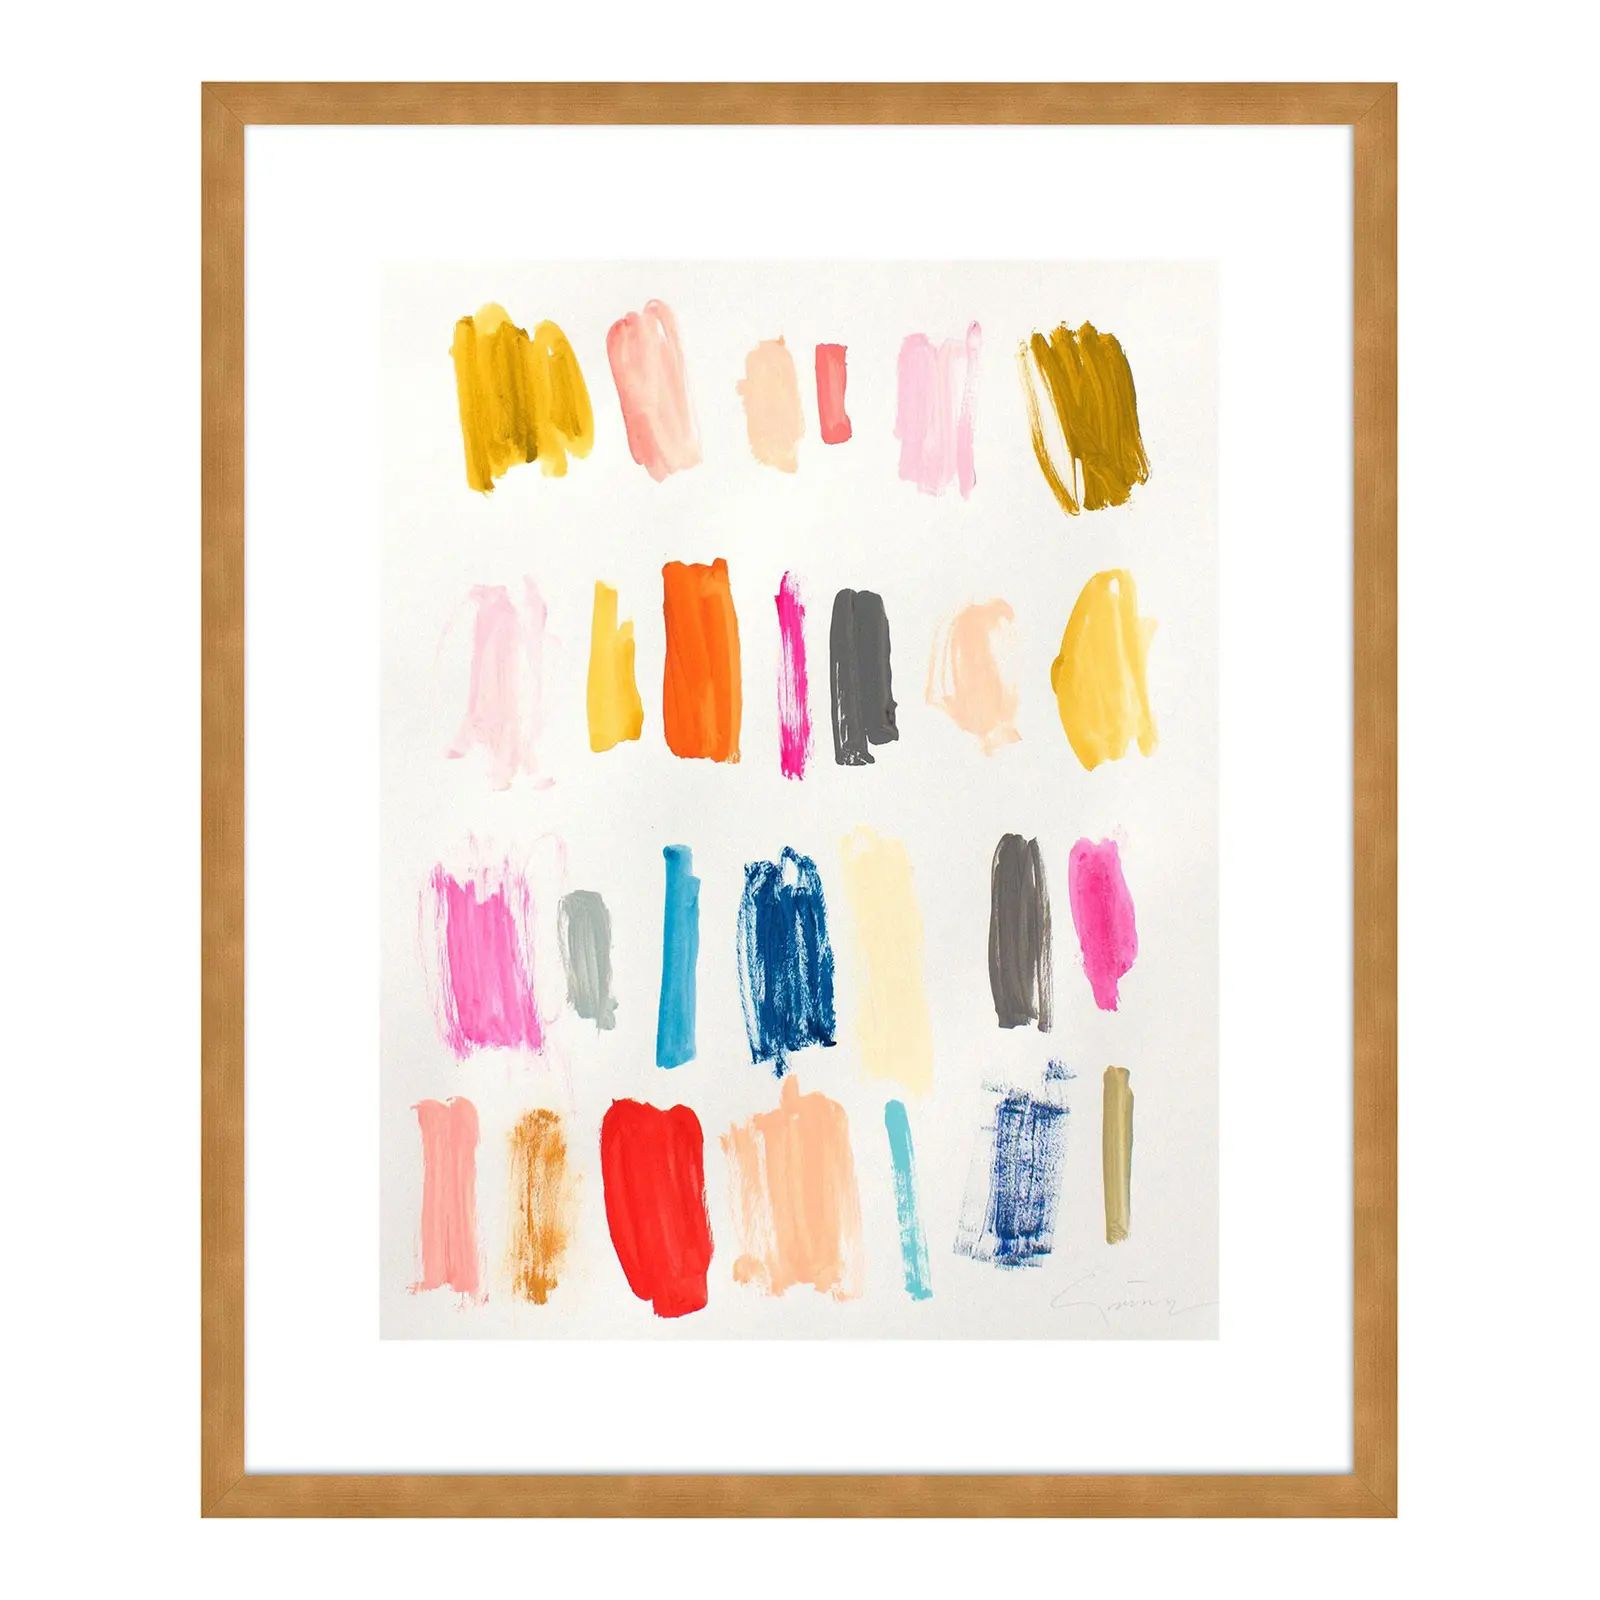 Color Instinct No. 1 by Lesley Grainger in Gold Frame, Small Art Print | Chairish